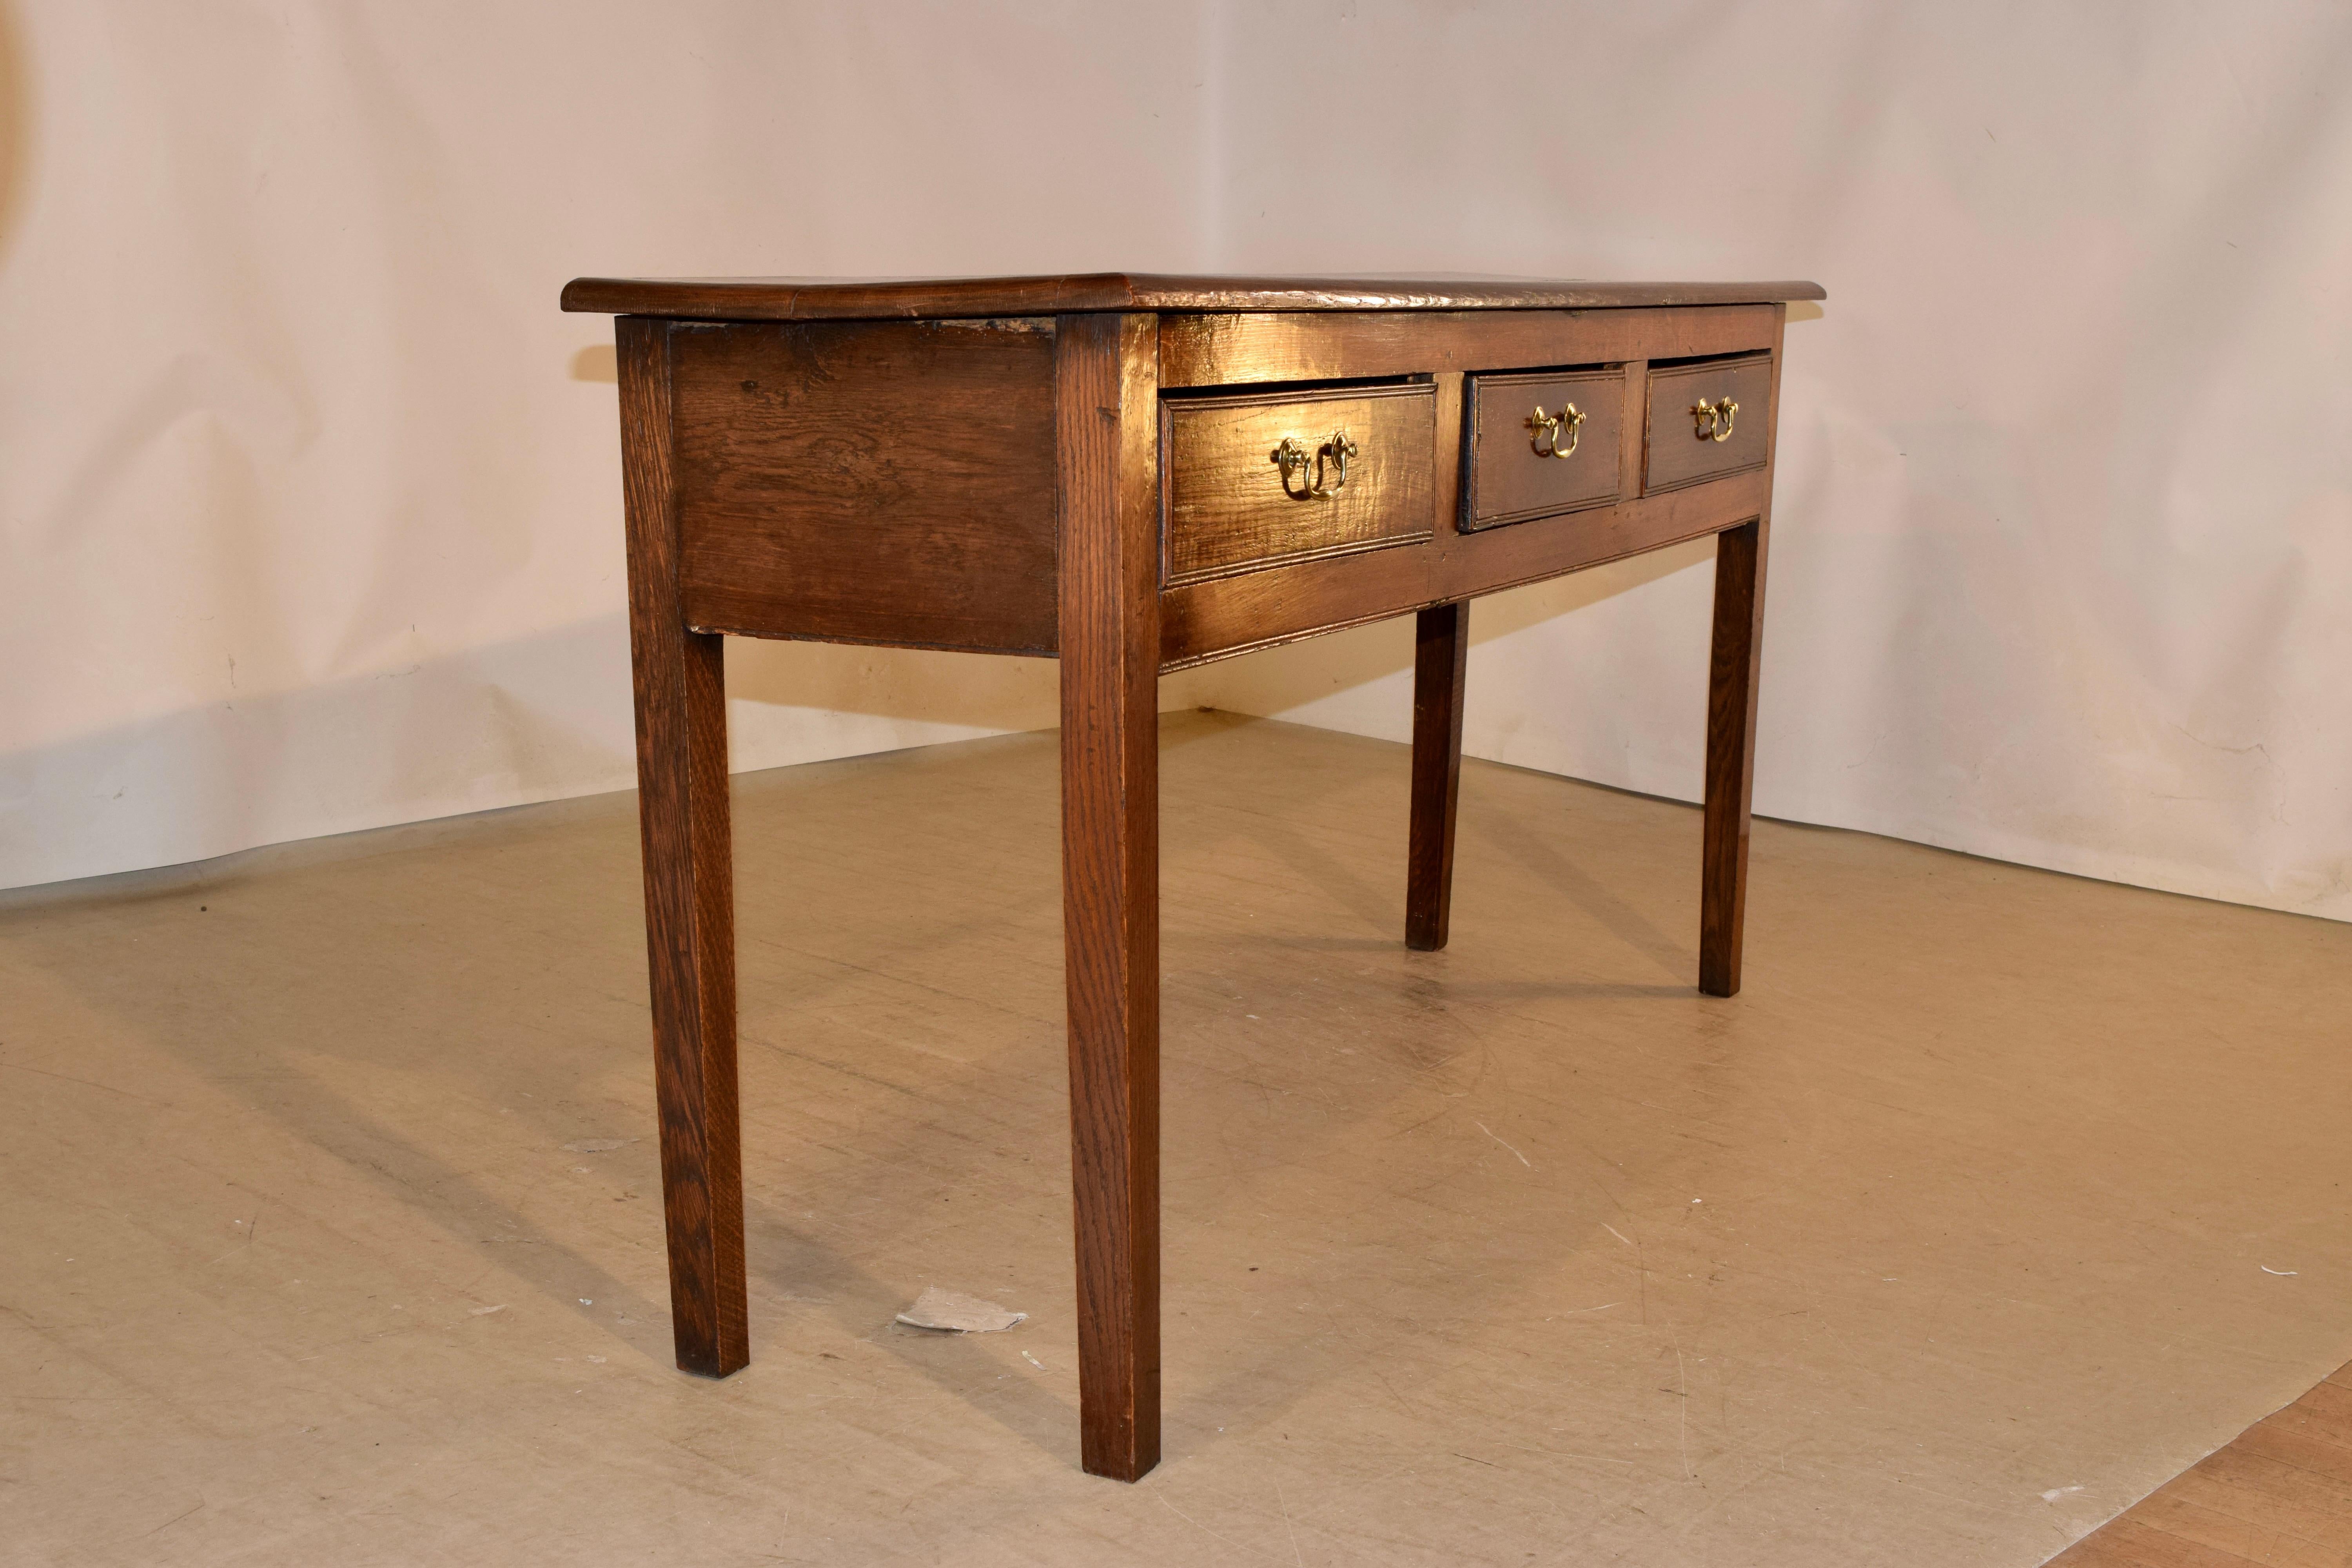 Circa 1900 oak sideboard from England with simple and elegant lines. The top is made from two boards, following down to a simple apron, containing three drawers in the front and supported on slightly tapered legs.